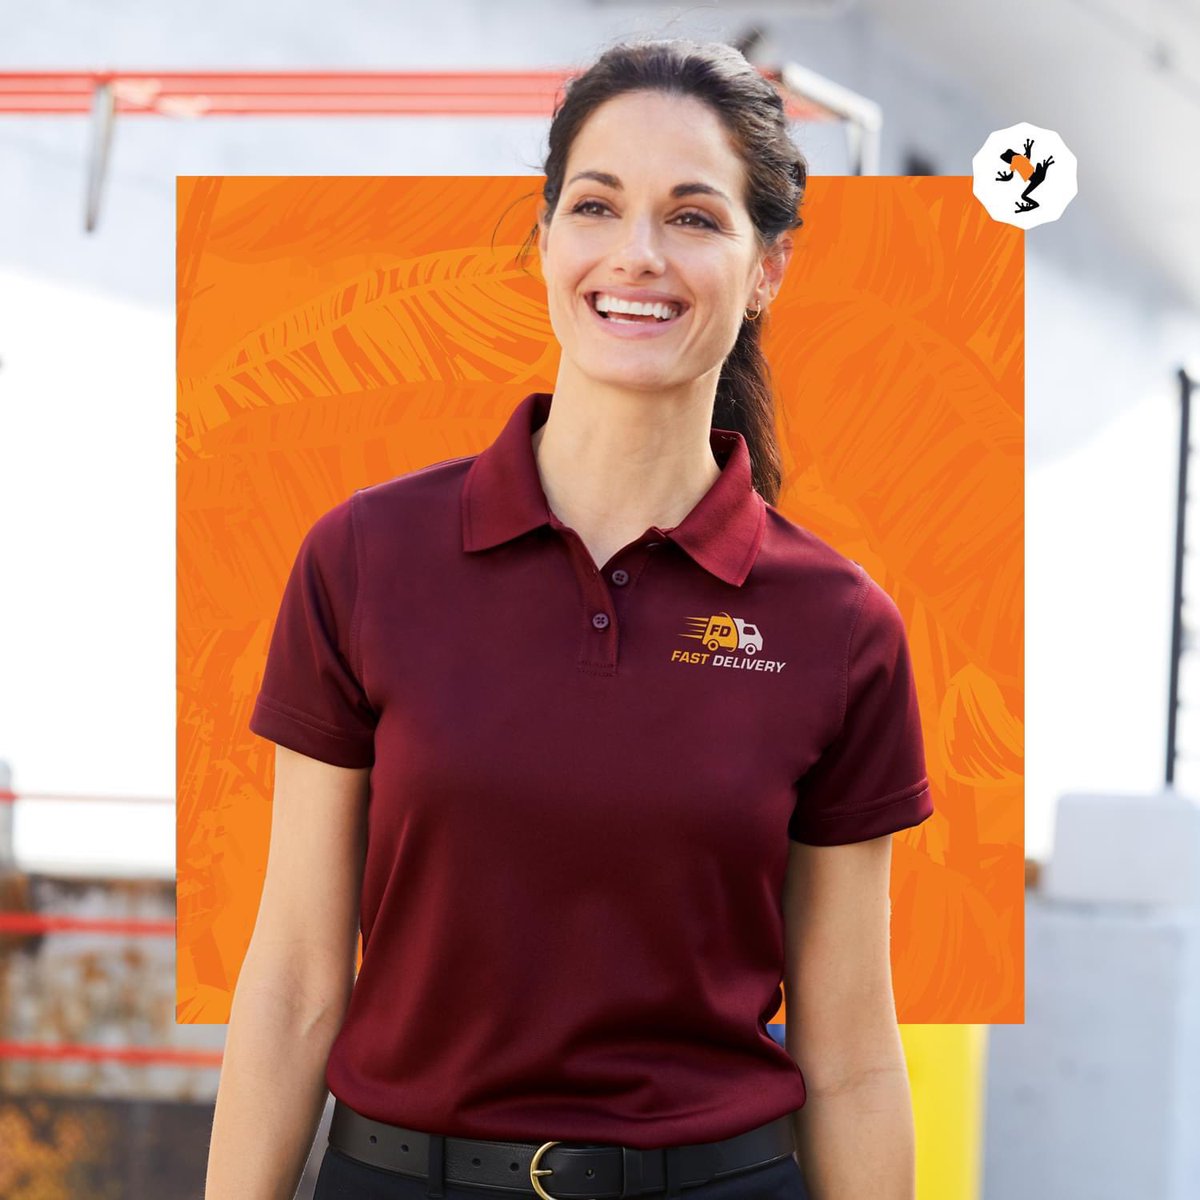 Looking to promote your small business? Outfit your employees with some awesome company T-shirts! Fast turnarounds and no artwork fees make branding your business hassle free. #workwear #fashion #workwearstyle #ootd #style #logo #embroidery